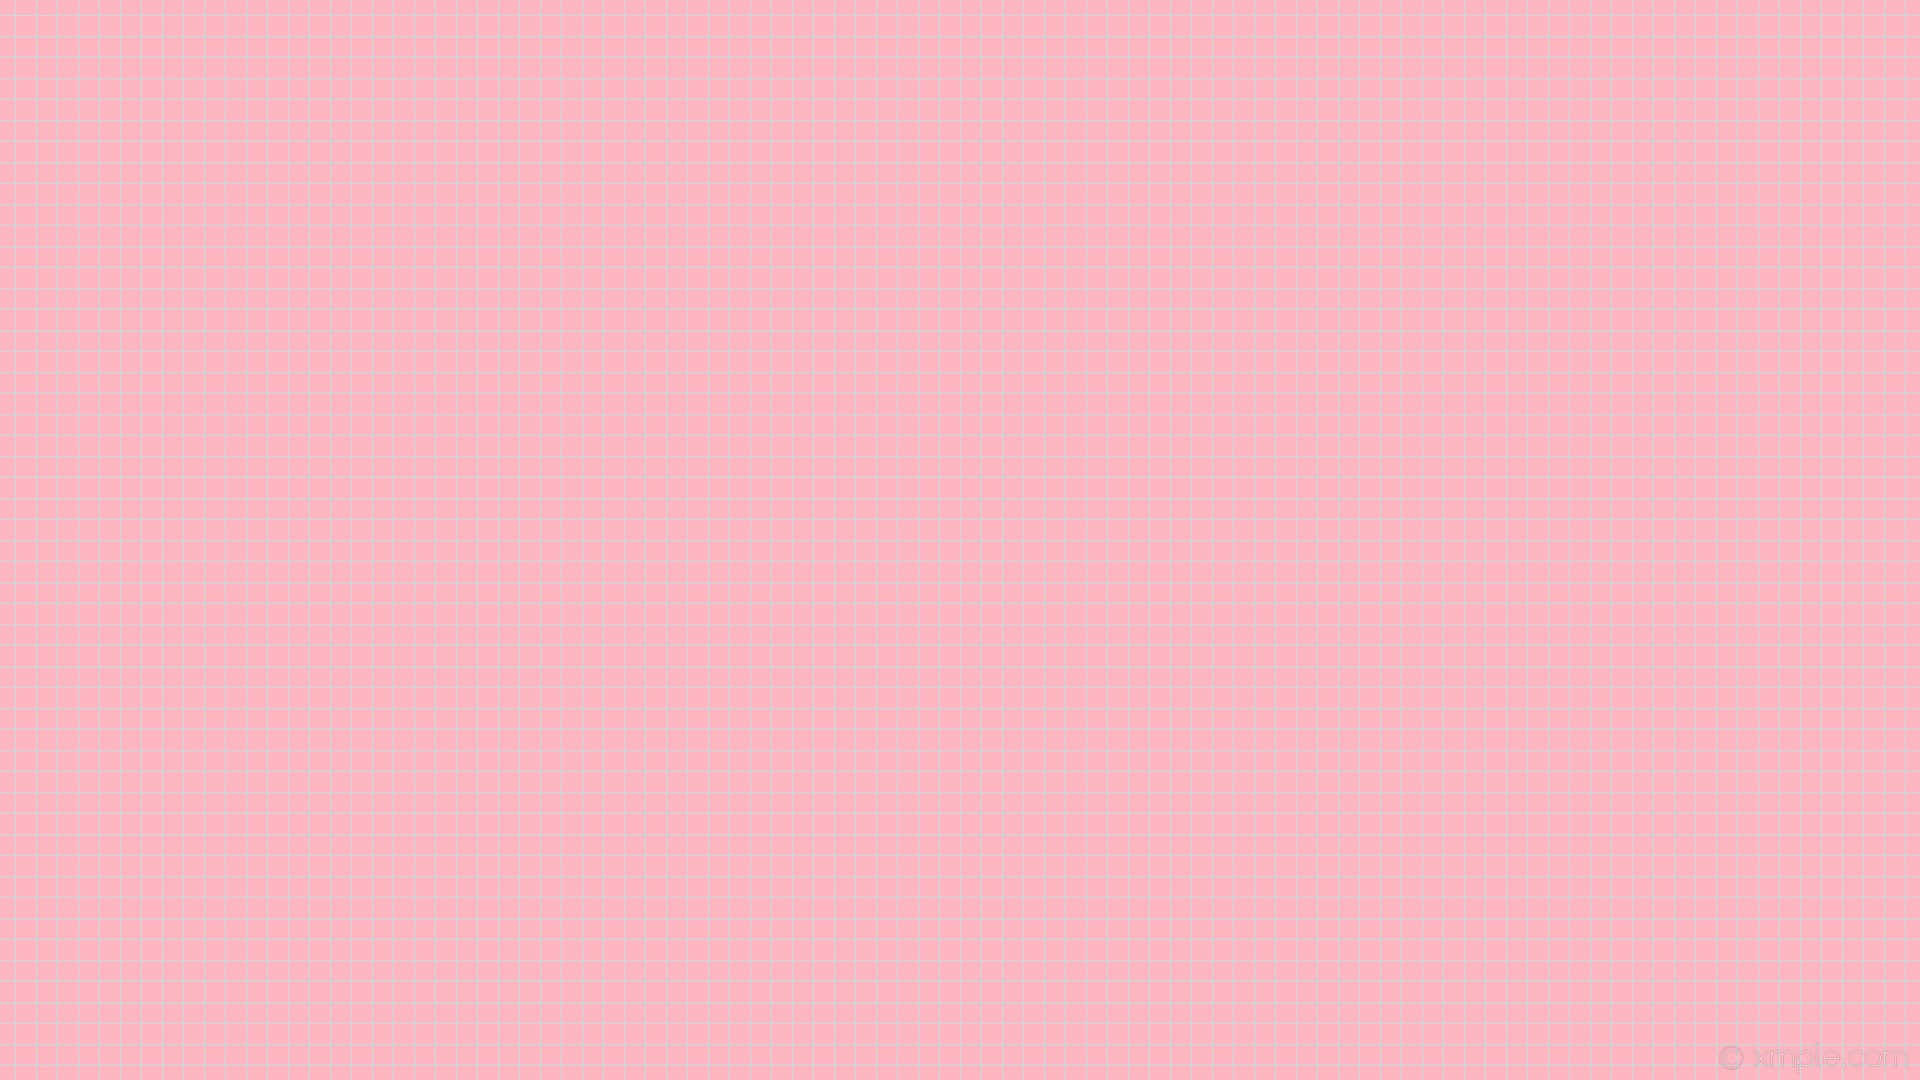 Download A Pink Checkered Background With White Lines 